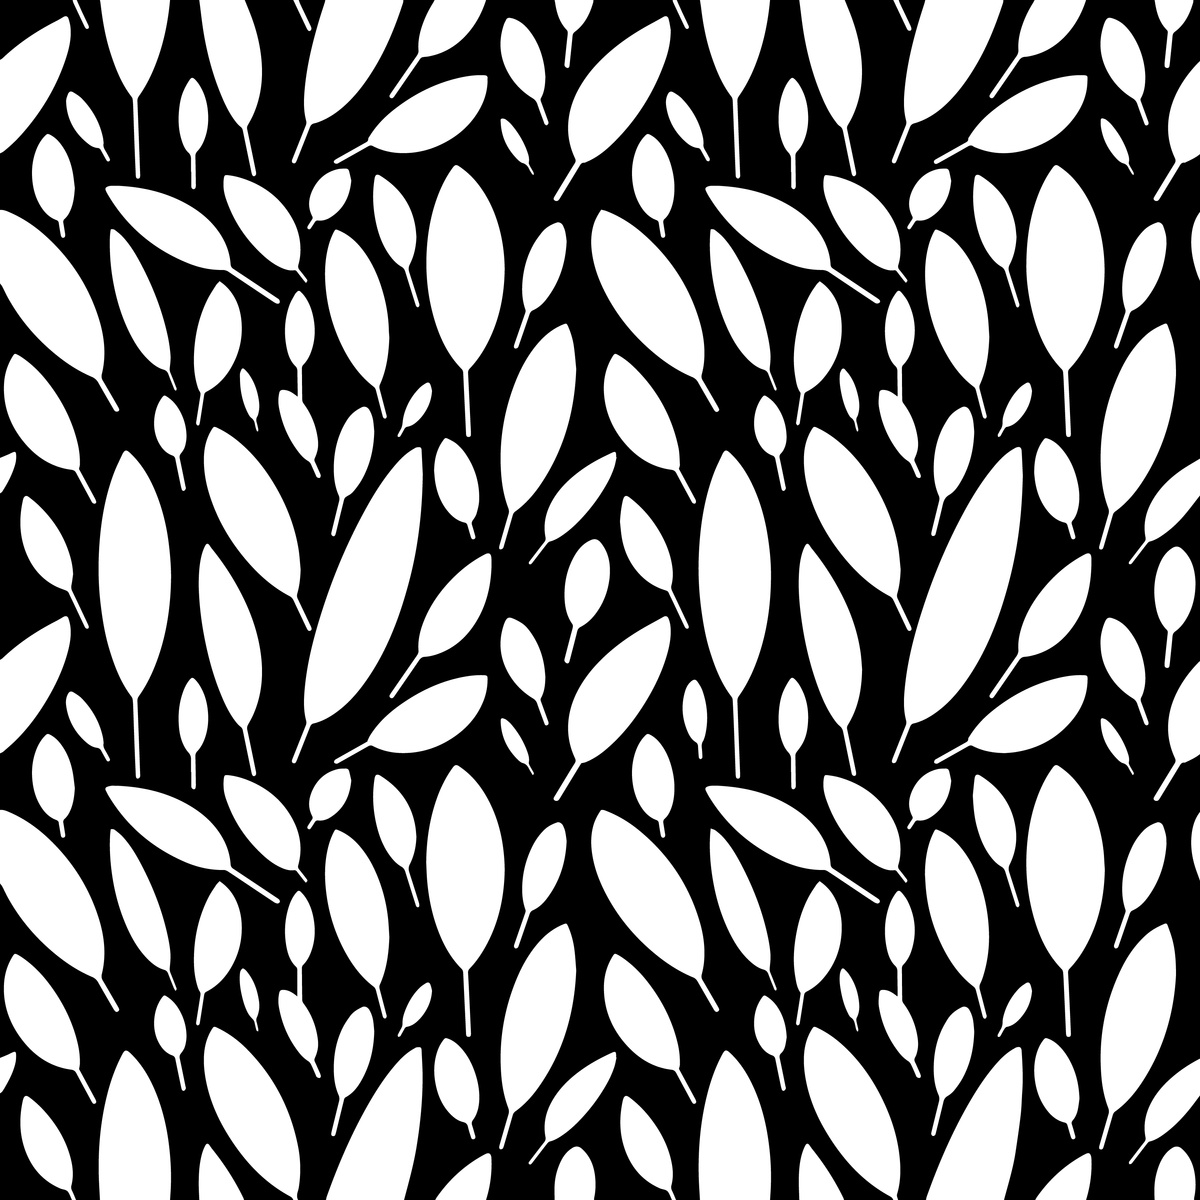 Black and White Leaves Pattern. Scandinavian Style